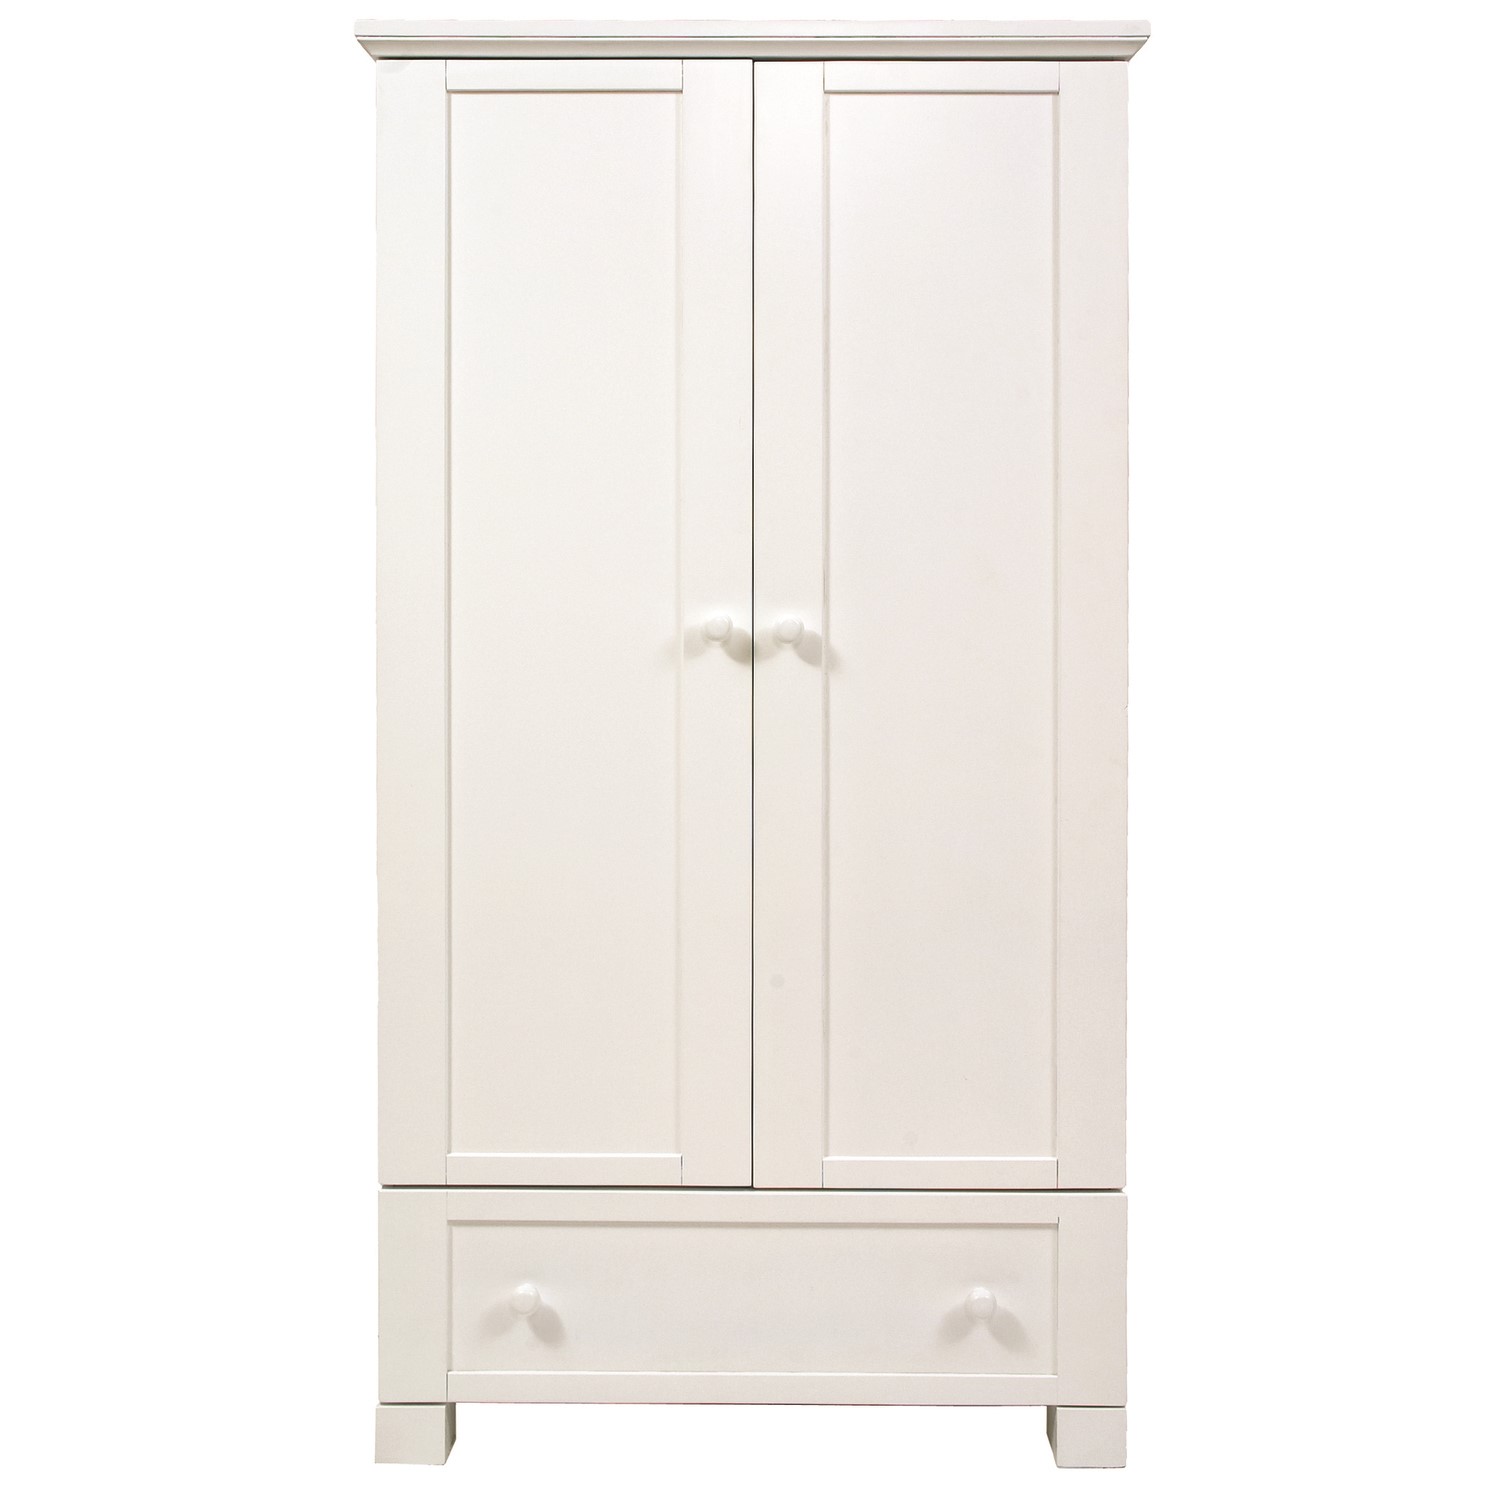 Photo of Nursery wardrobe with drawer and shelf in white - montreal - east coast